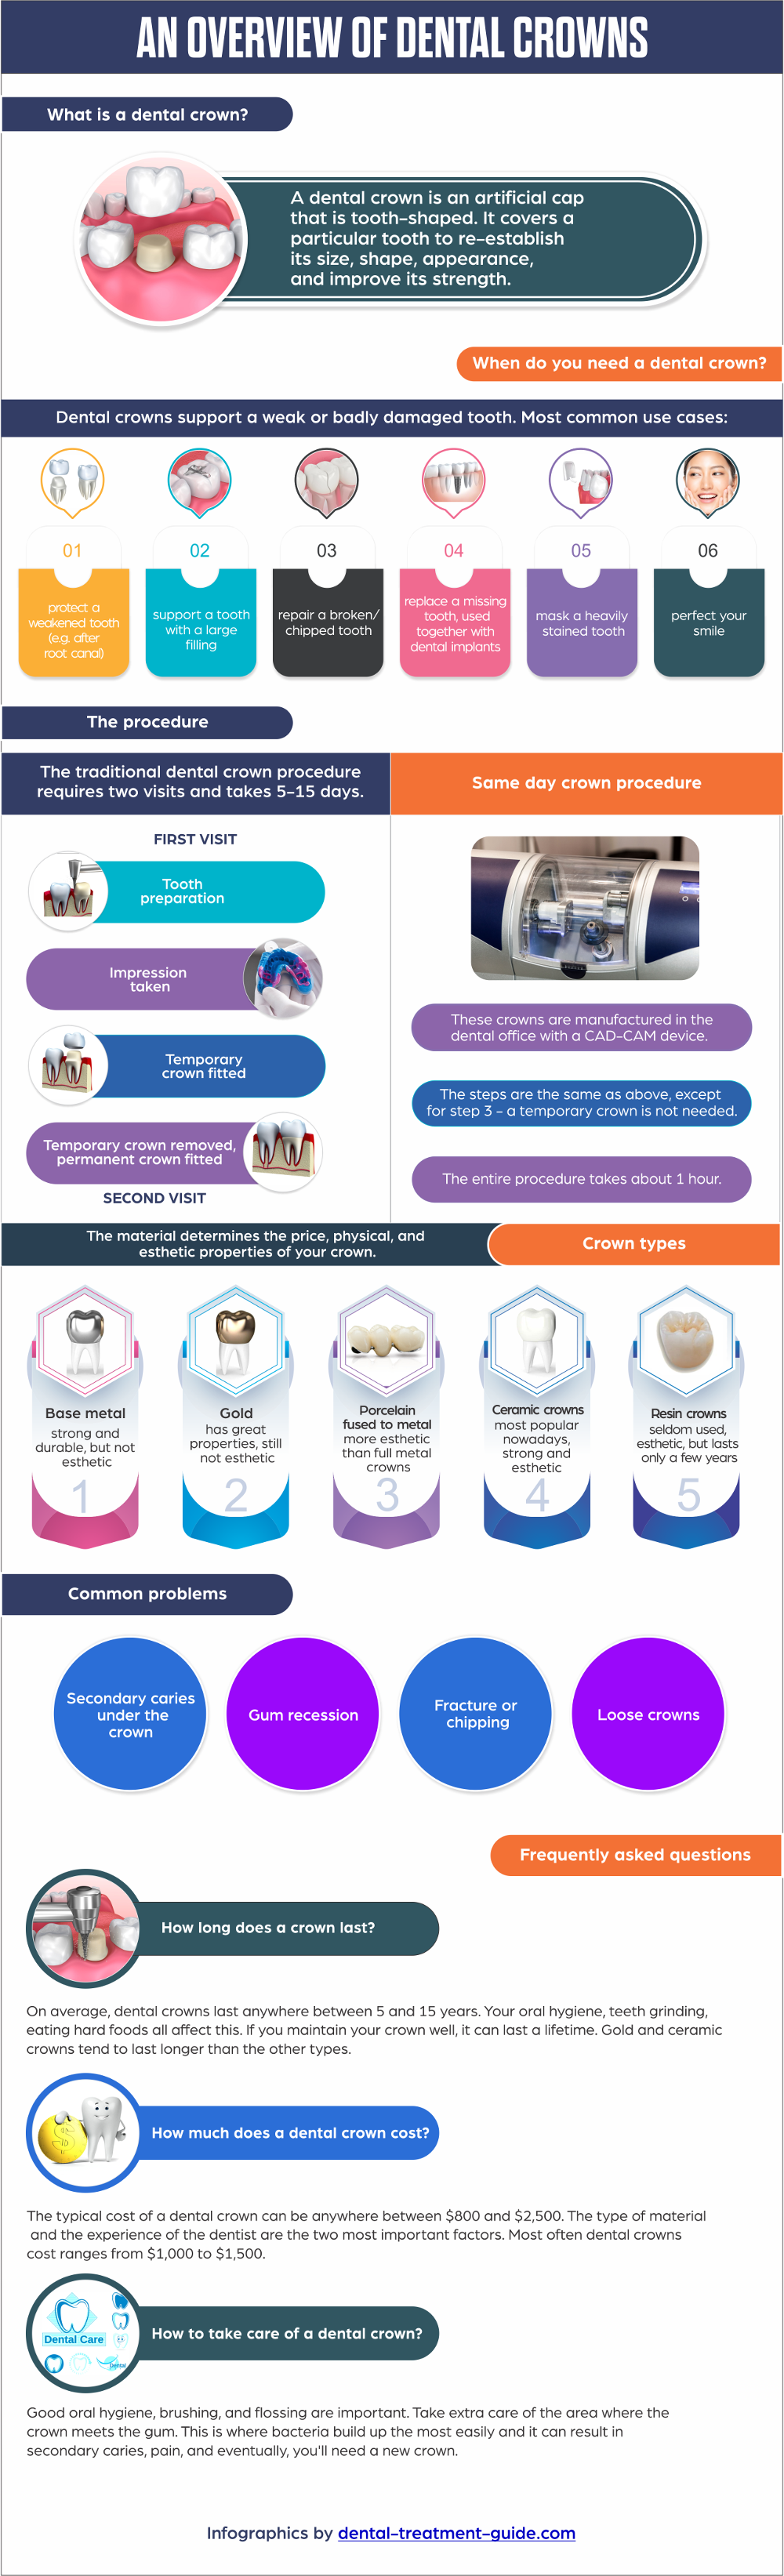 dental-crowns-overview-infographic-plaza